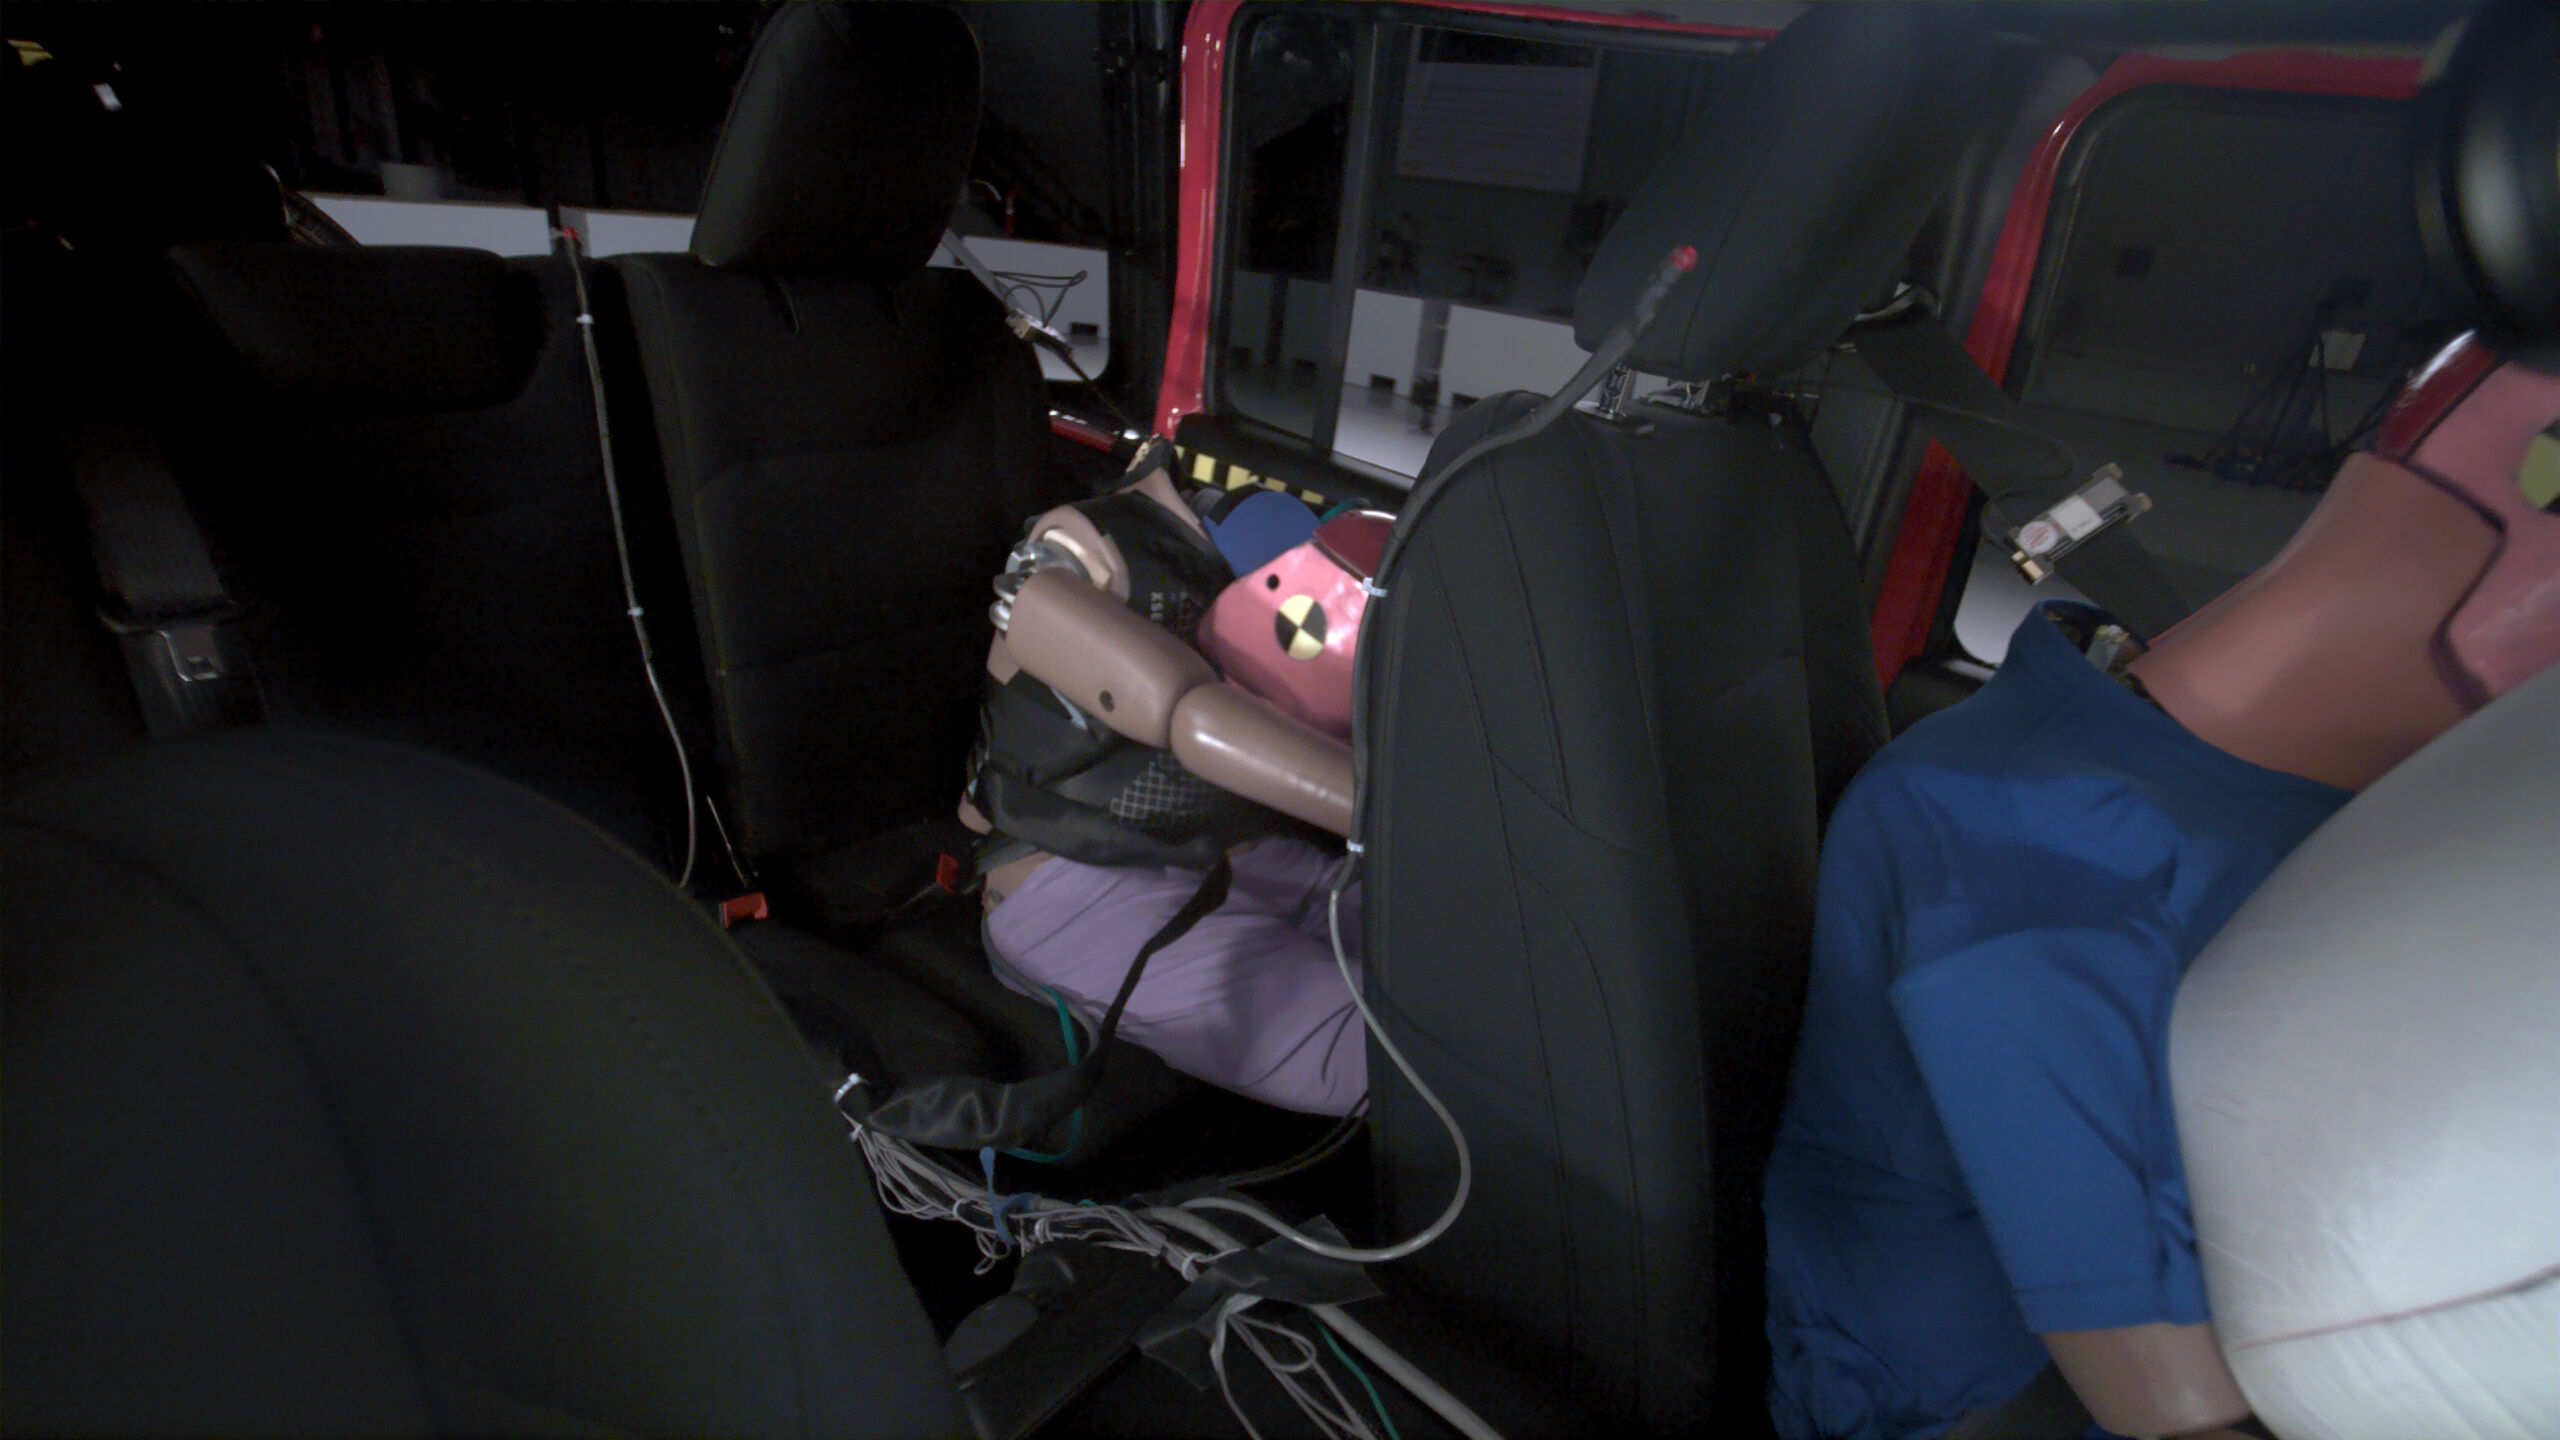 Mustang Mach-E, Model Y earn good rating in IIHS rear-seat safety test |  Ars Technica